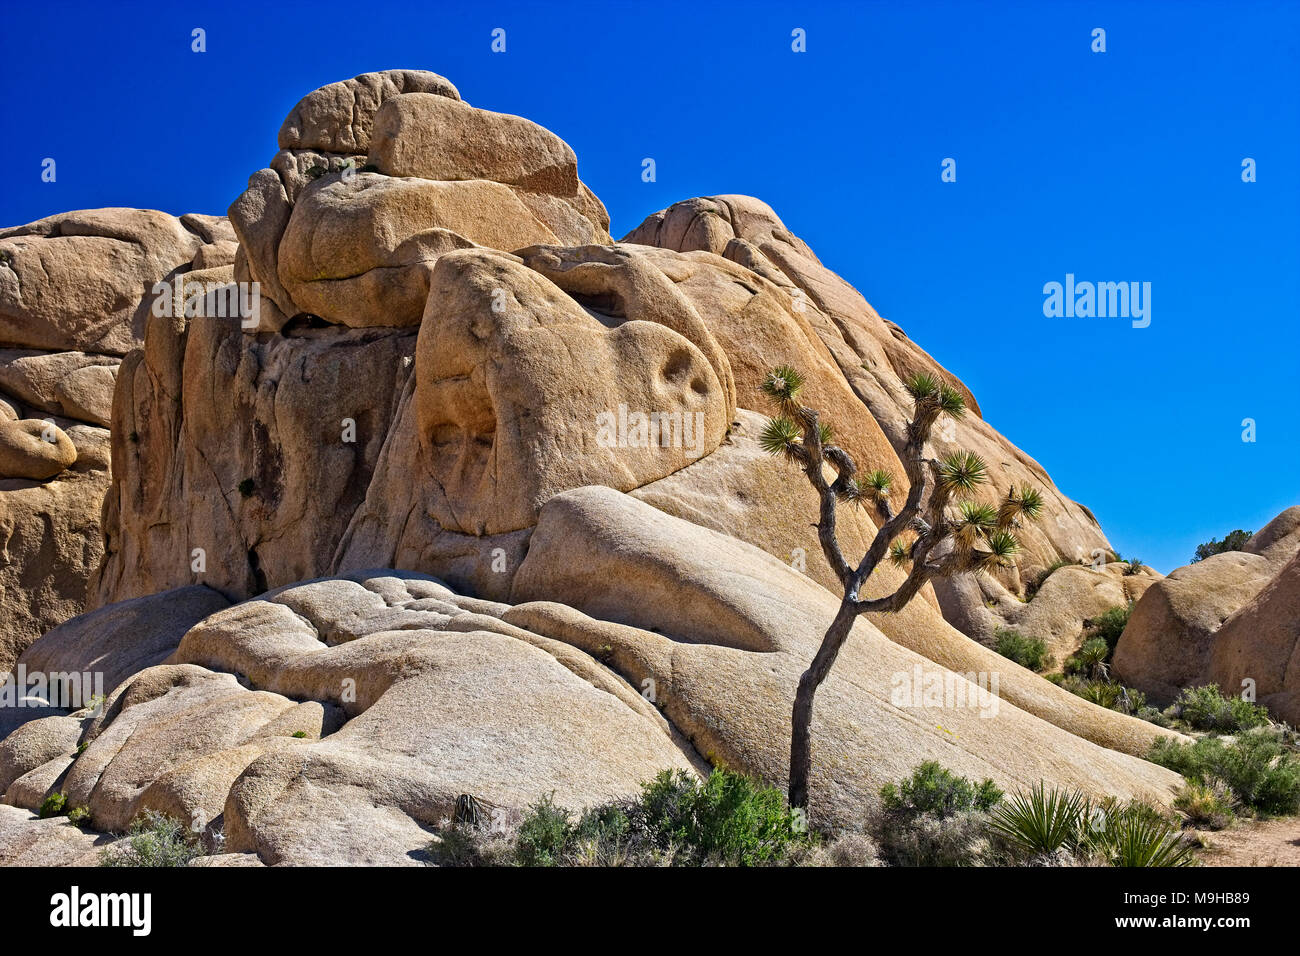 Single Joshua tree is dwarfed by the rock formations in Joshua tree national Park in Southern California’s Mojave Desert Stock Photo